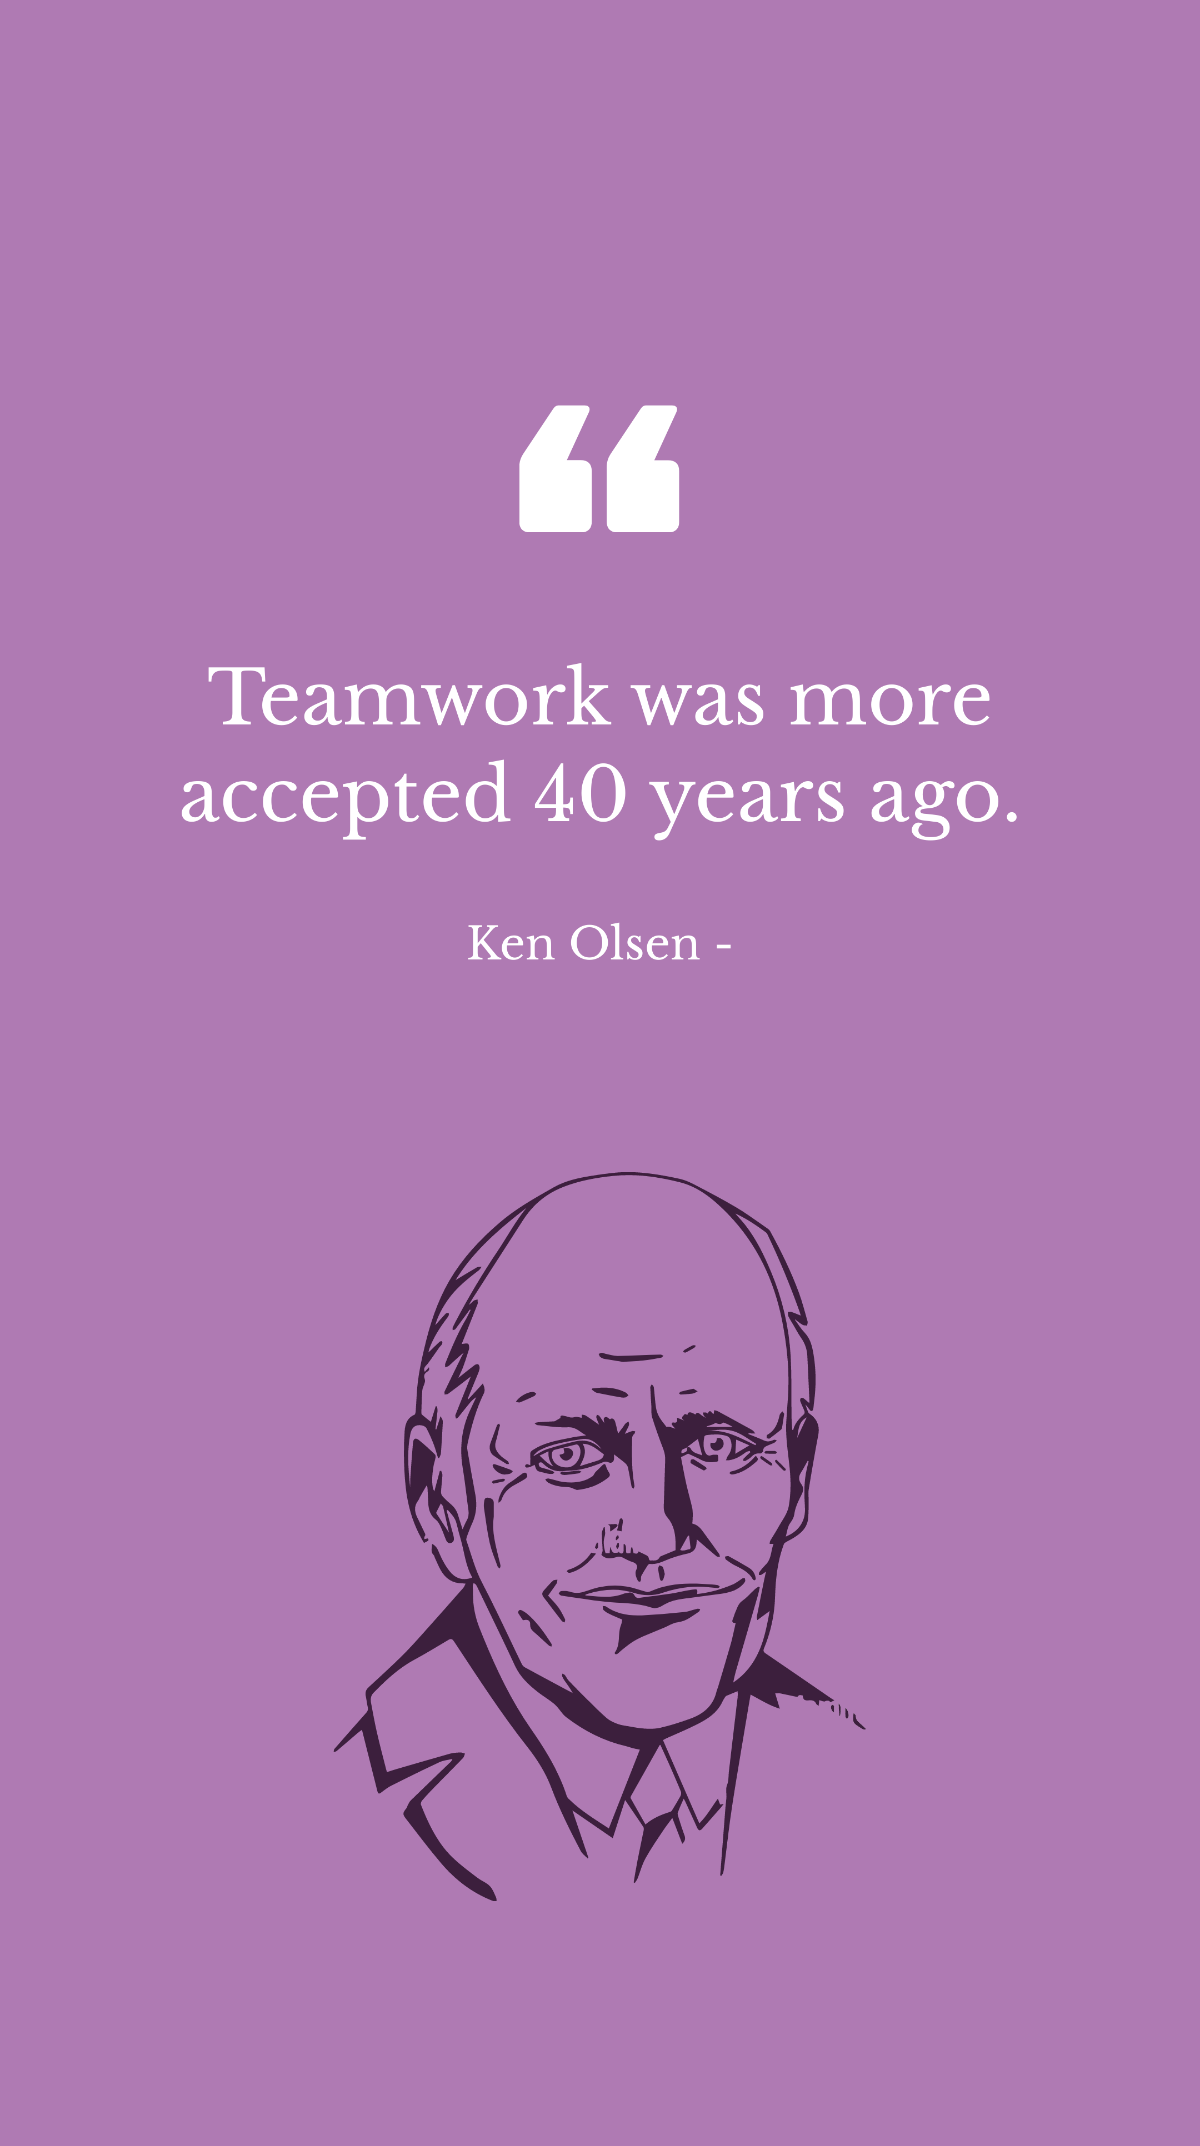 Free Ken Olsen - Teamwork was more accepted 40 years ago. Template